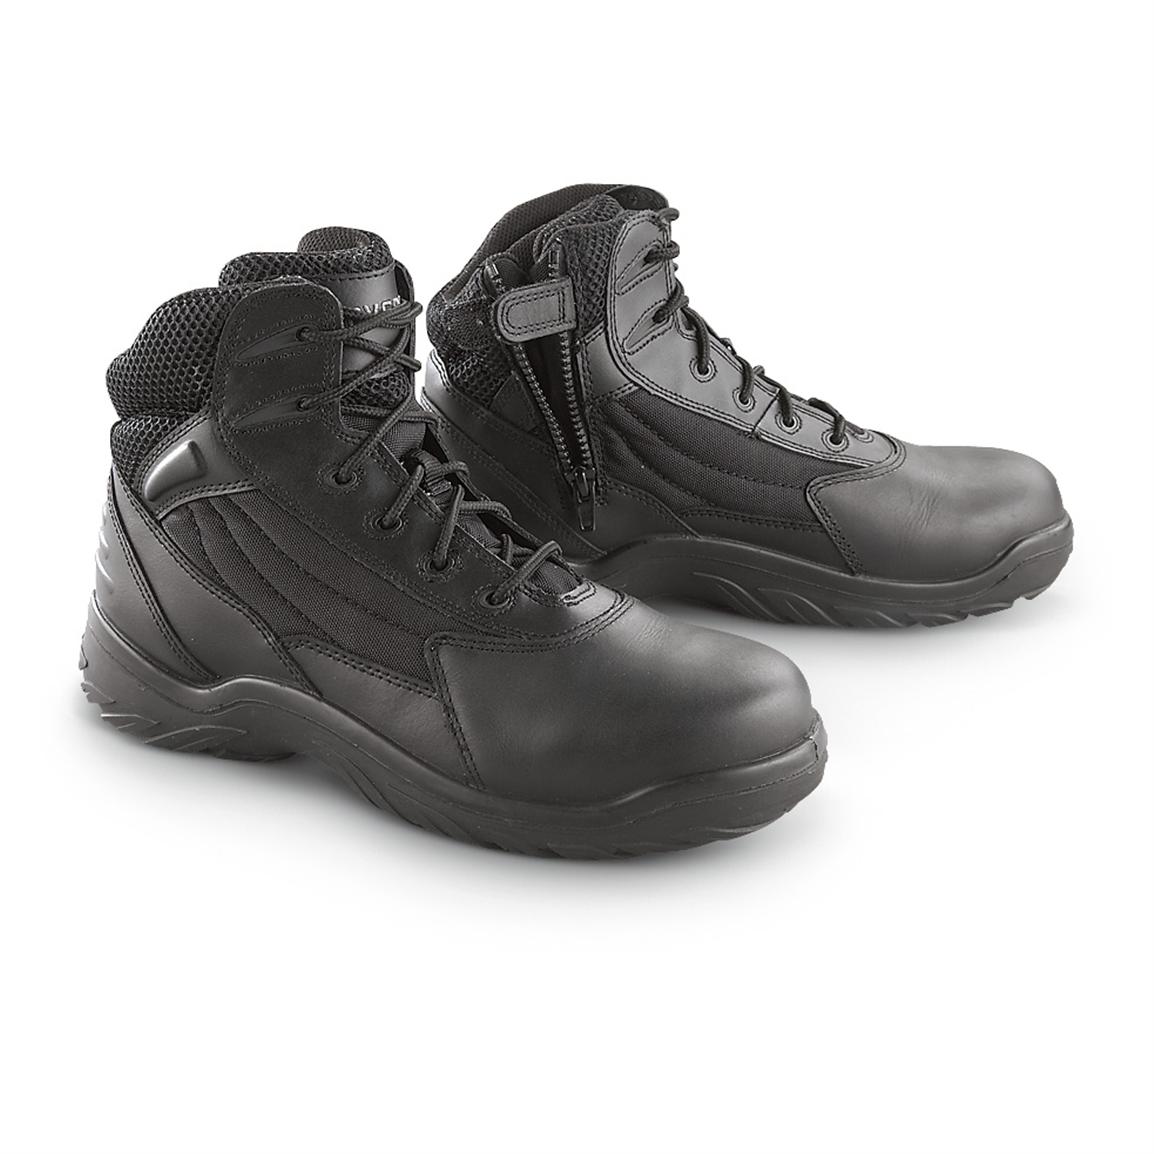 converse tactical boots 6 inch